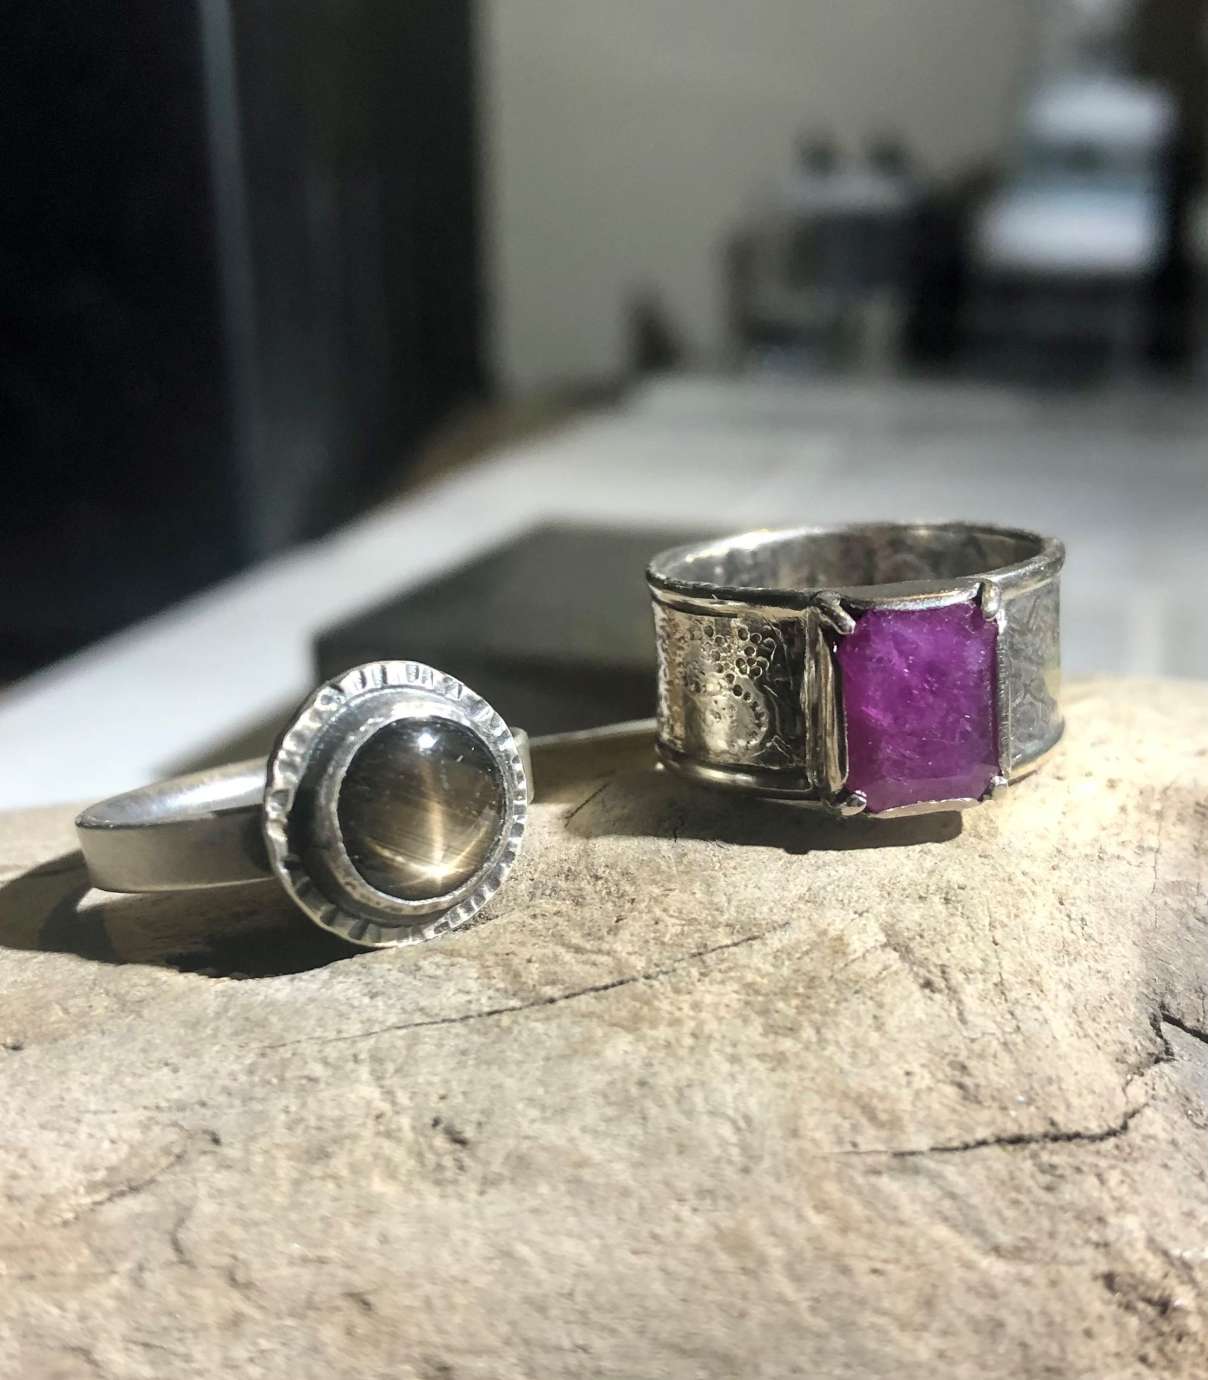 Two rings, a smaller one with a beige-green circle stone, a larger one with a square magenta stone